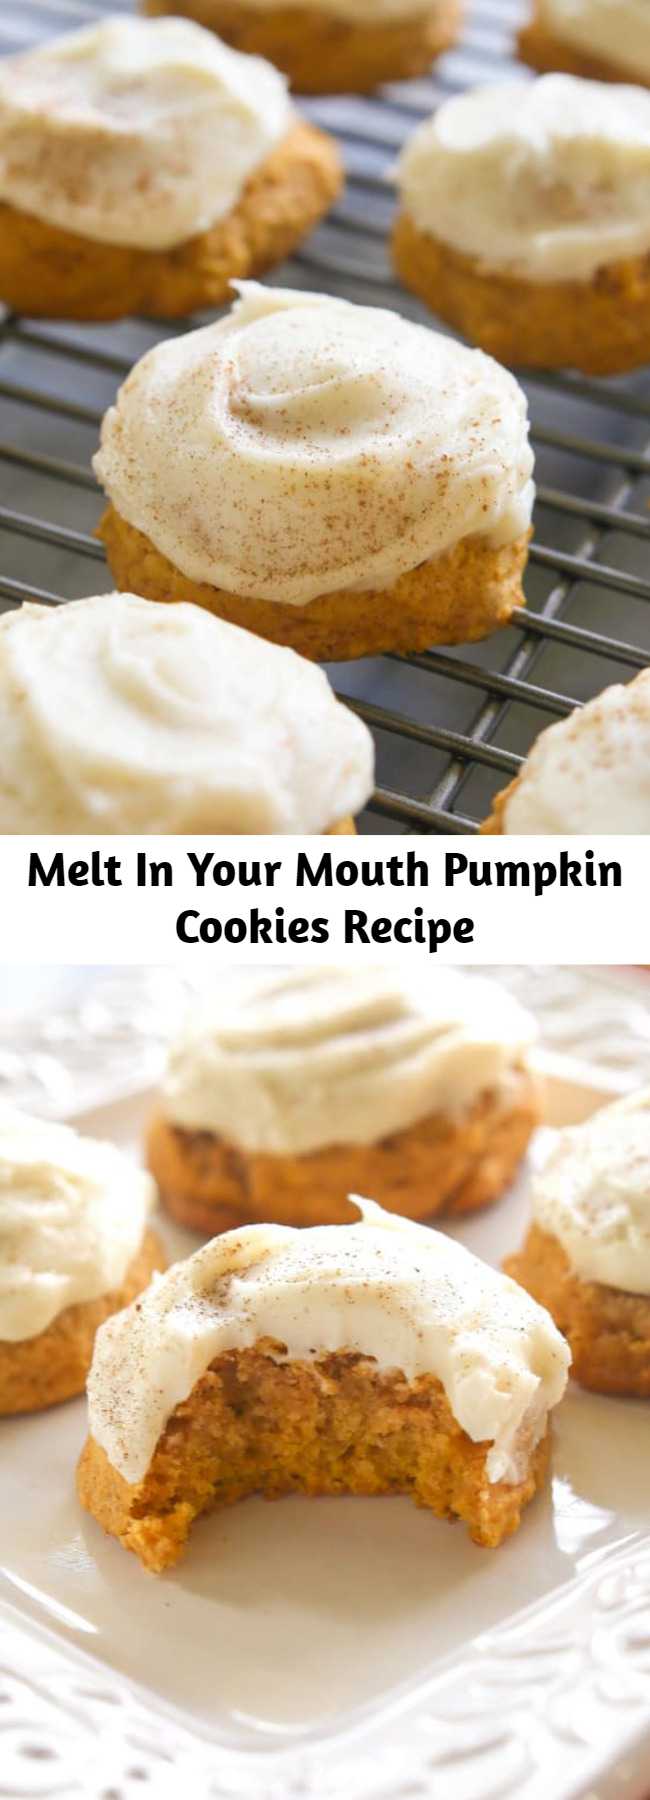 Melt In Your Mouth Pumpkin Cookies Recipe – Mom Secret Ingrediets